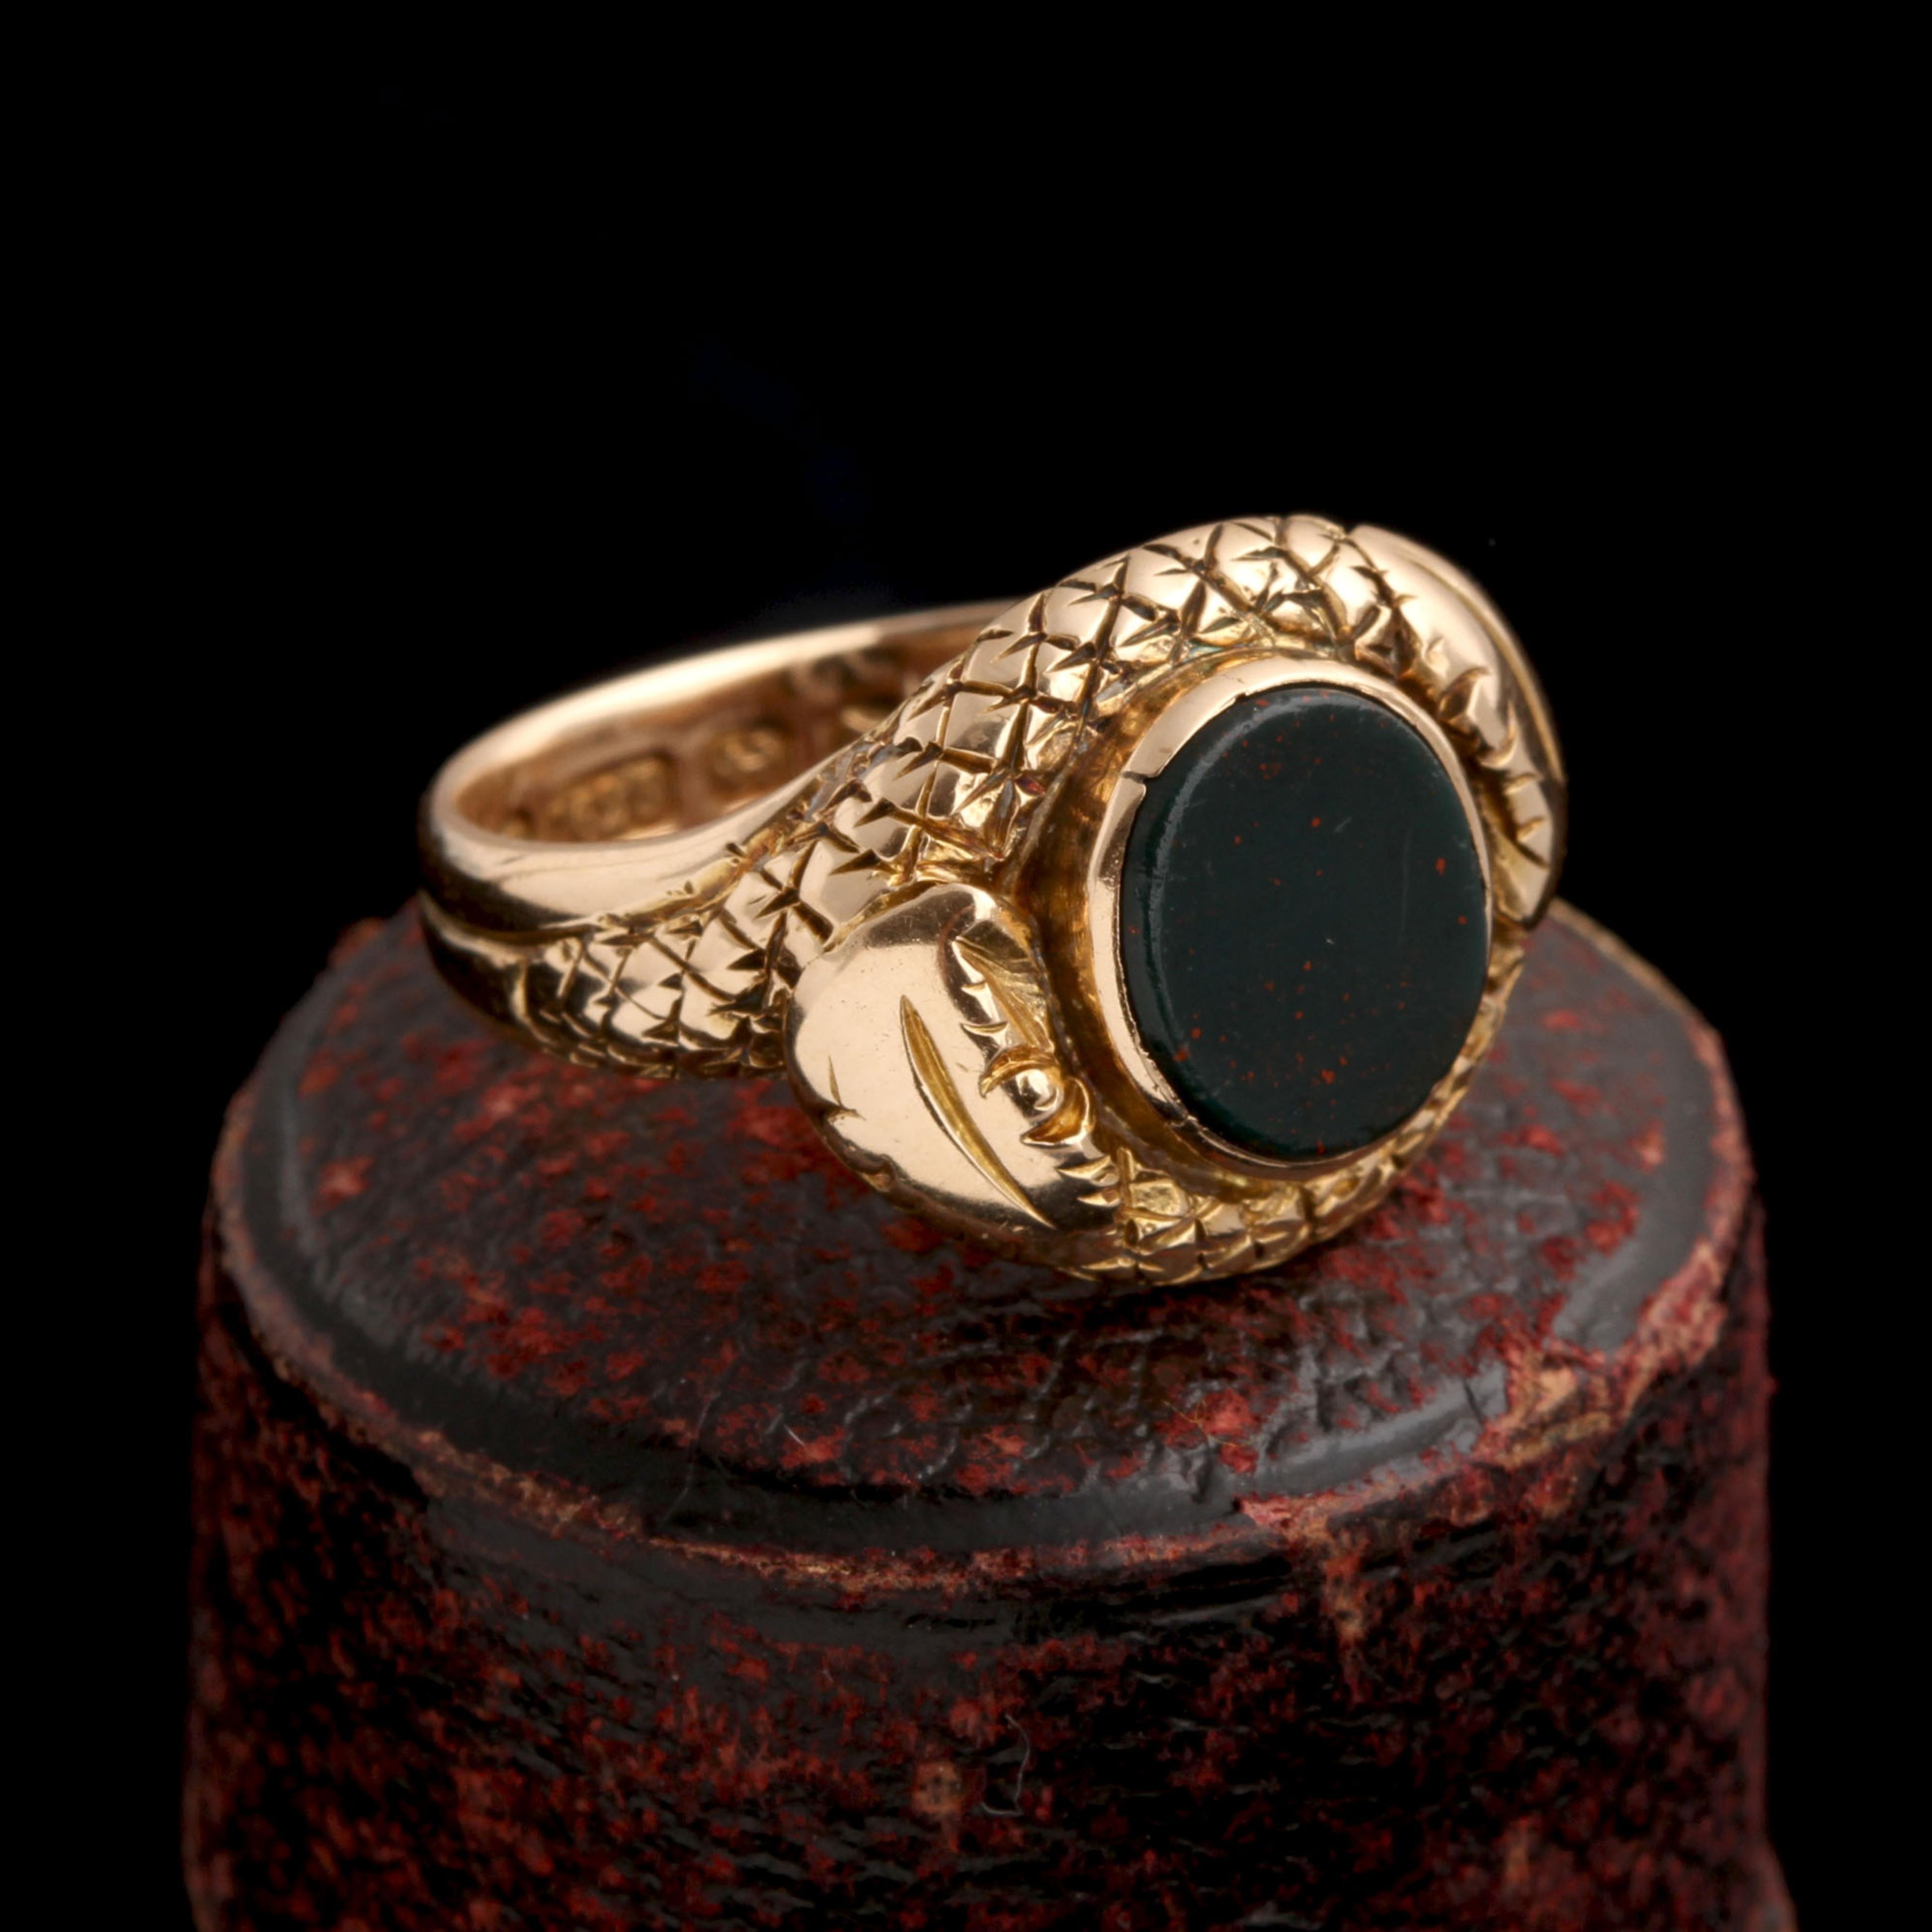 Victorian Coiled Snakes & Bloodstone Signet Ring